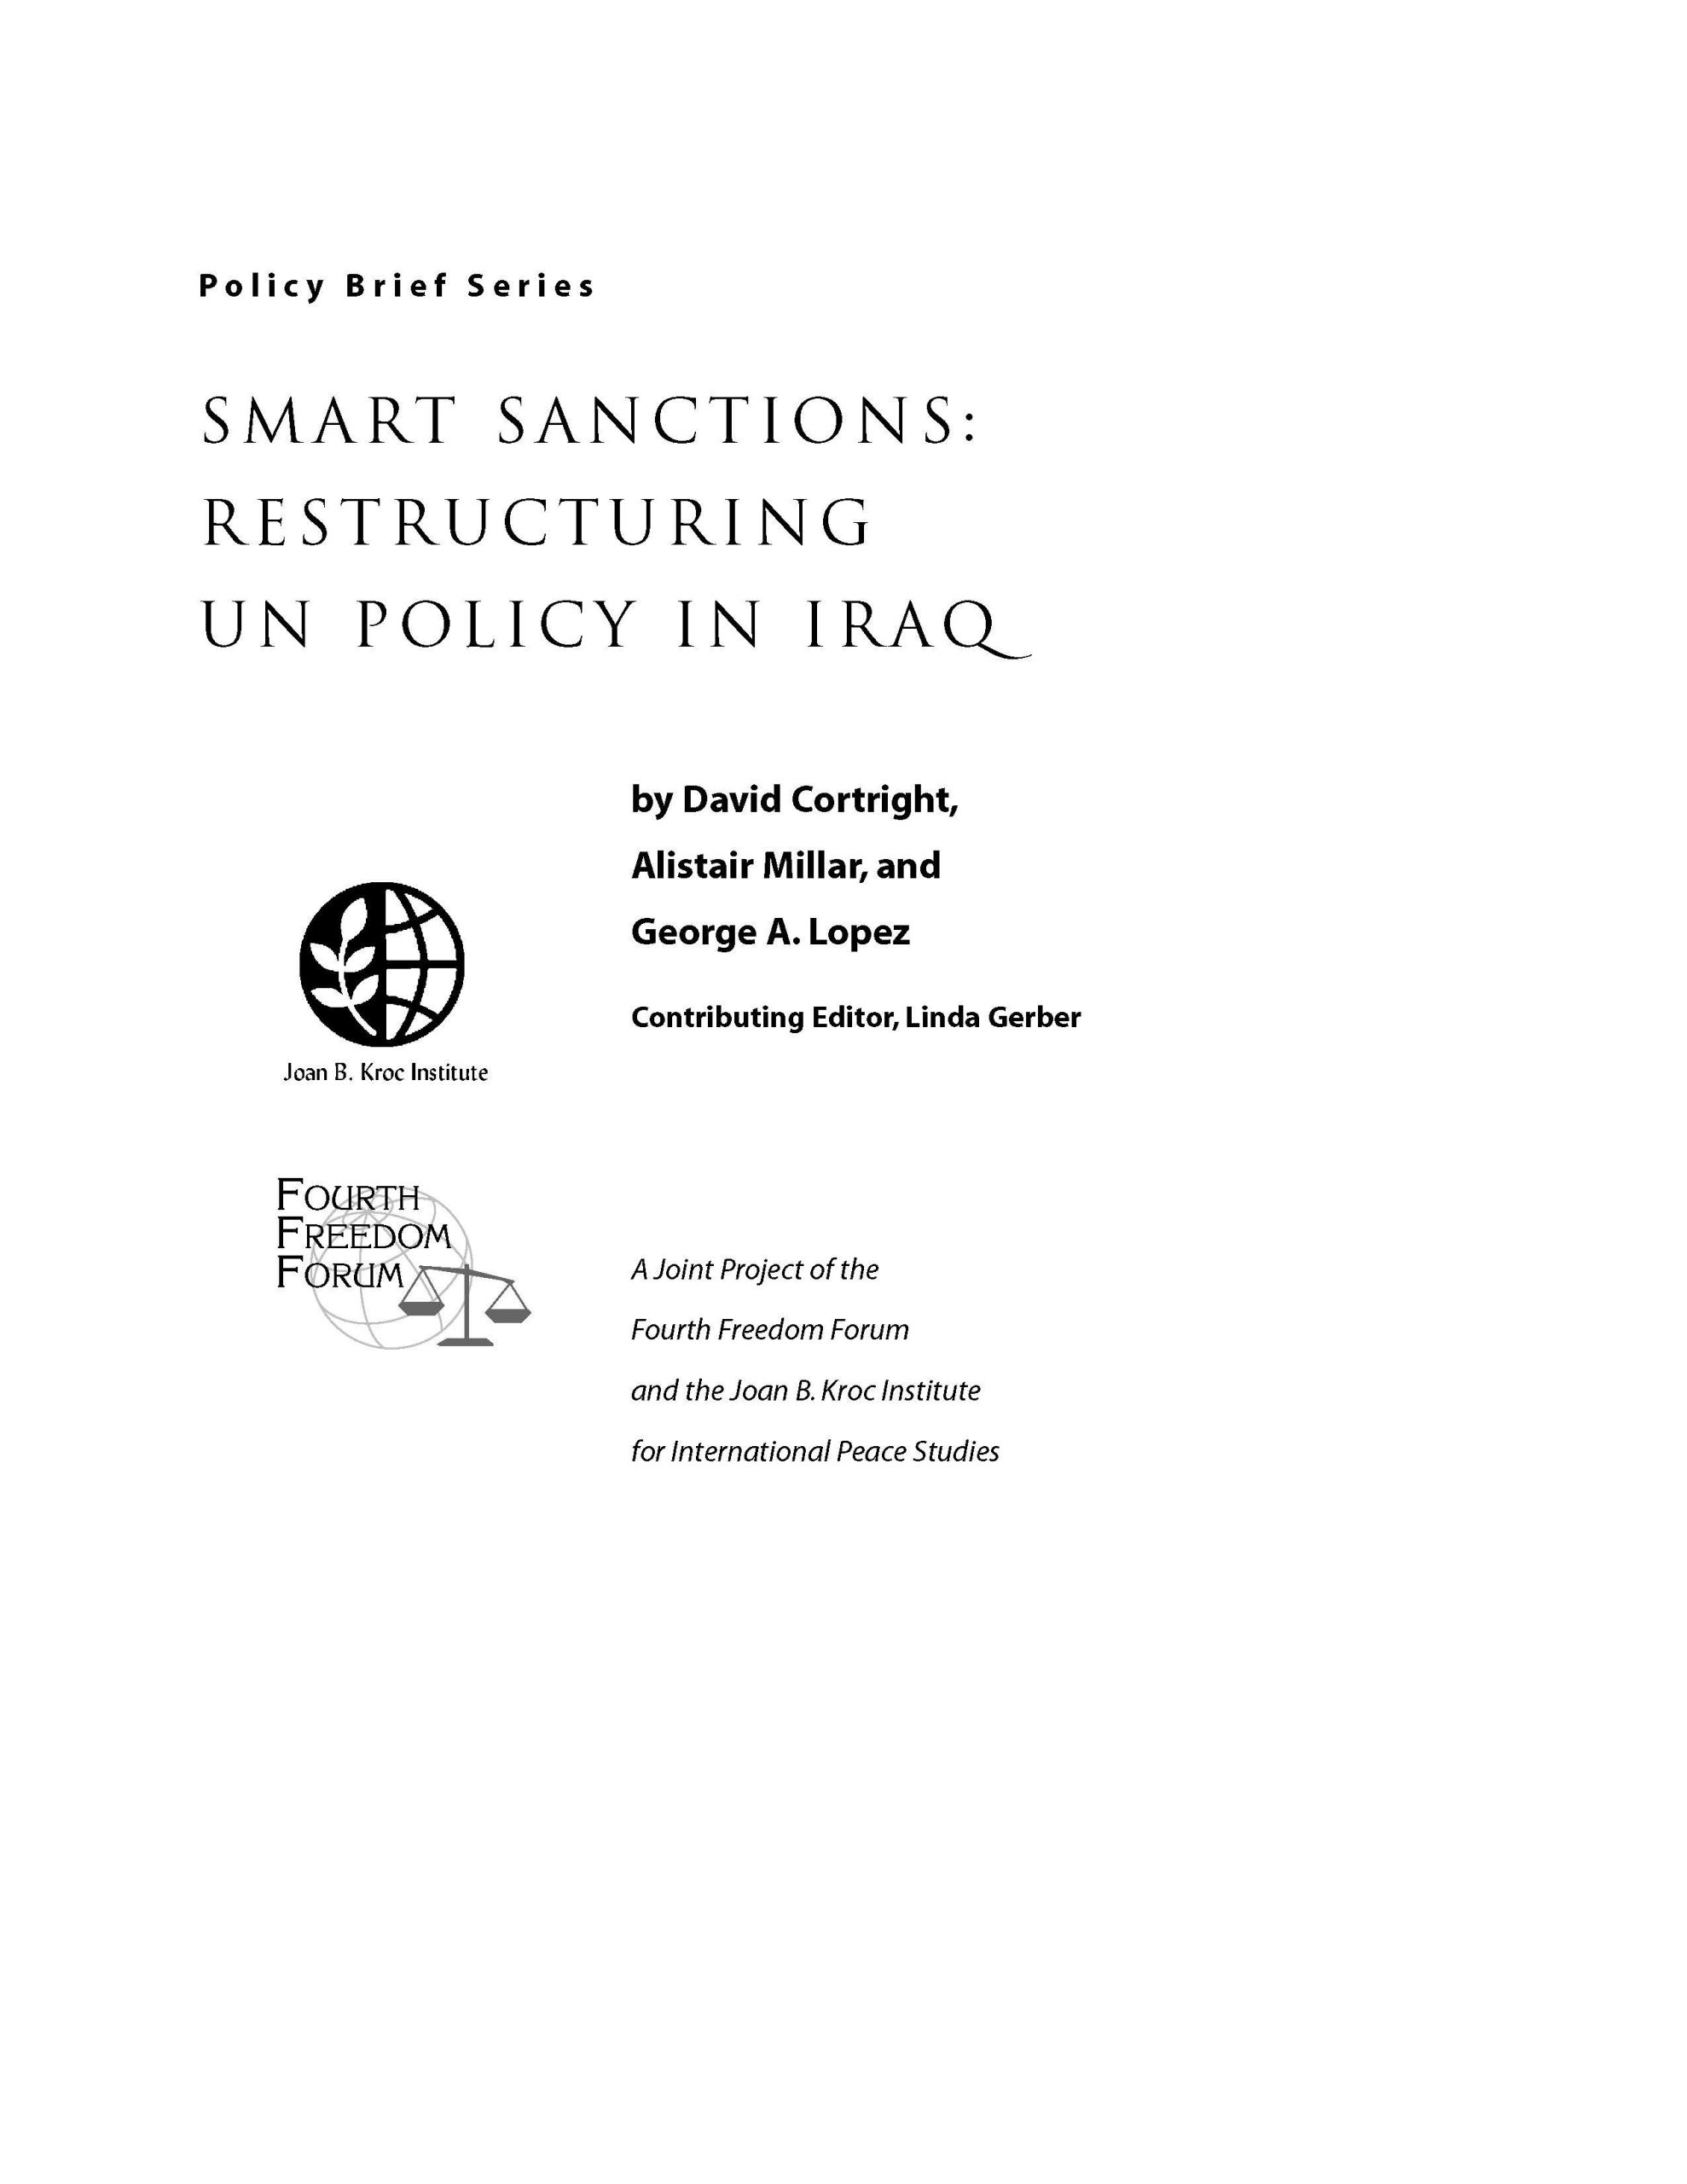 Smart Sanctions: Restructuring UN Policy in Iraq